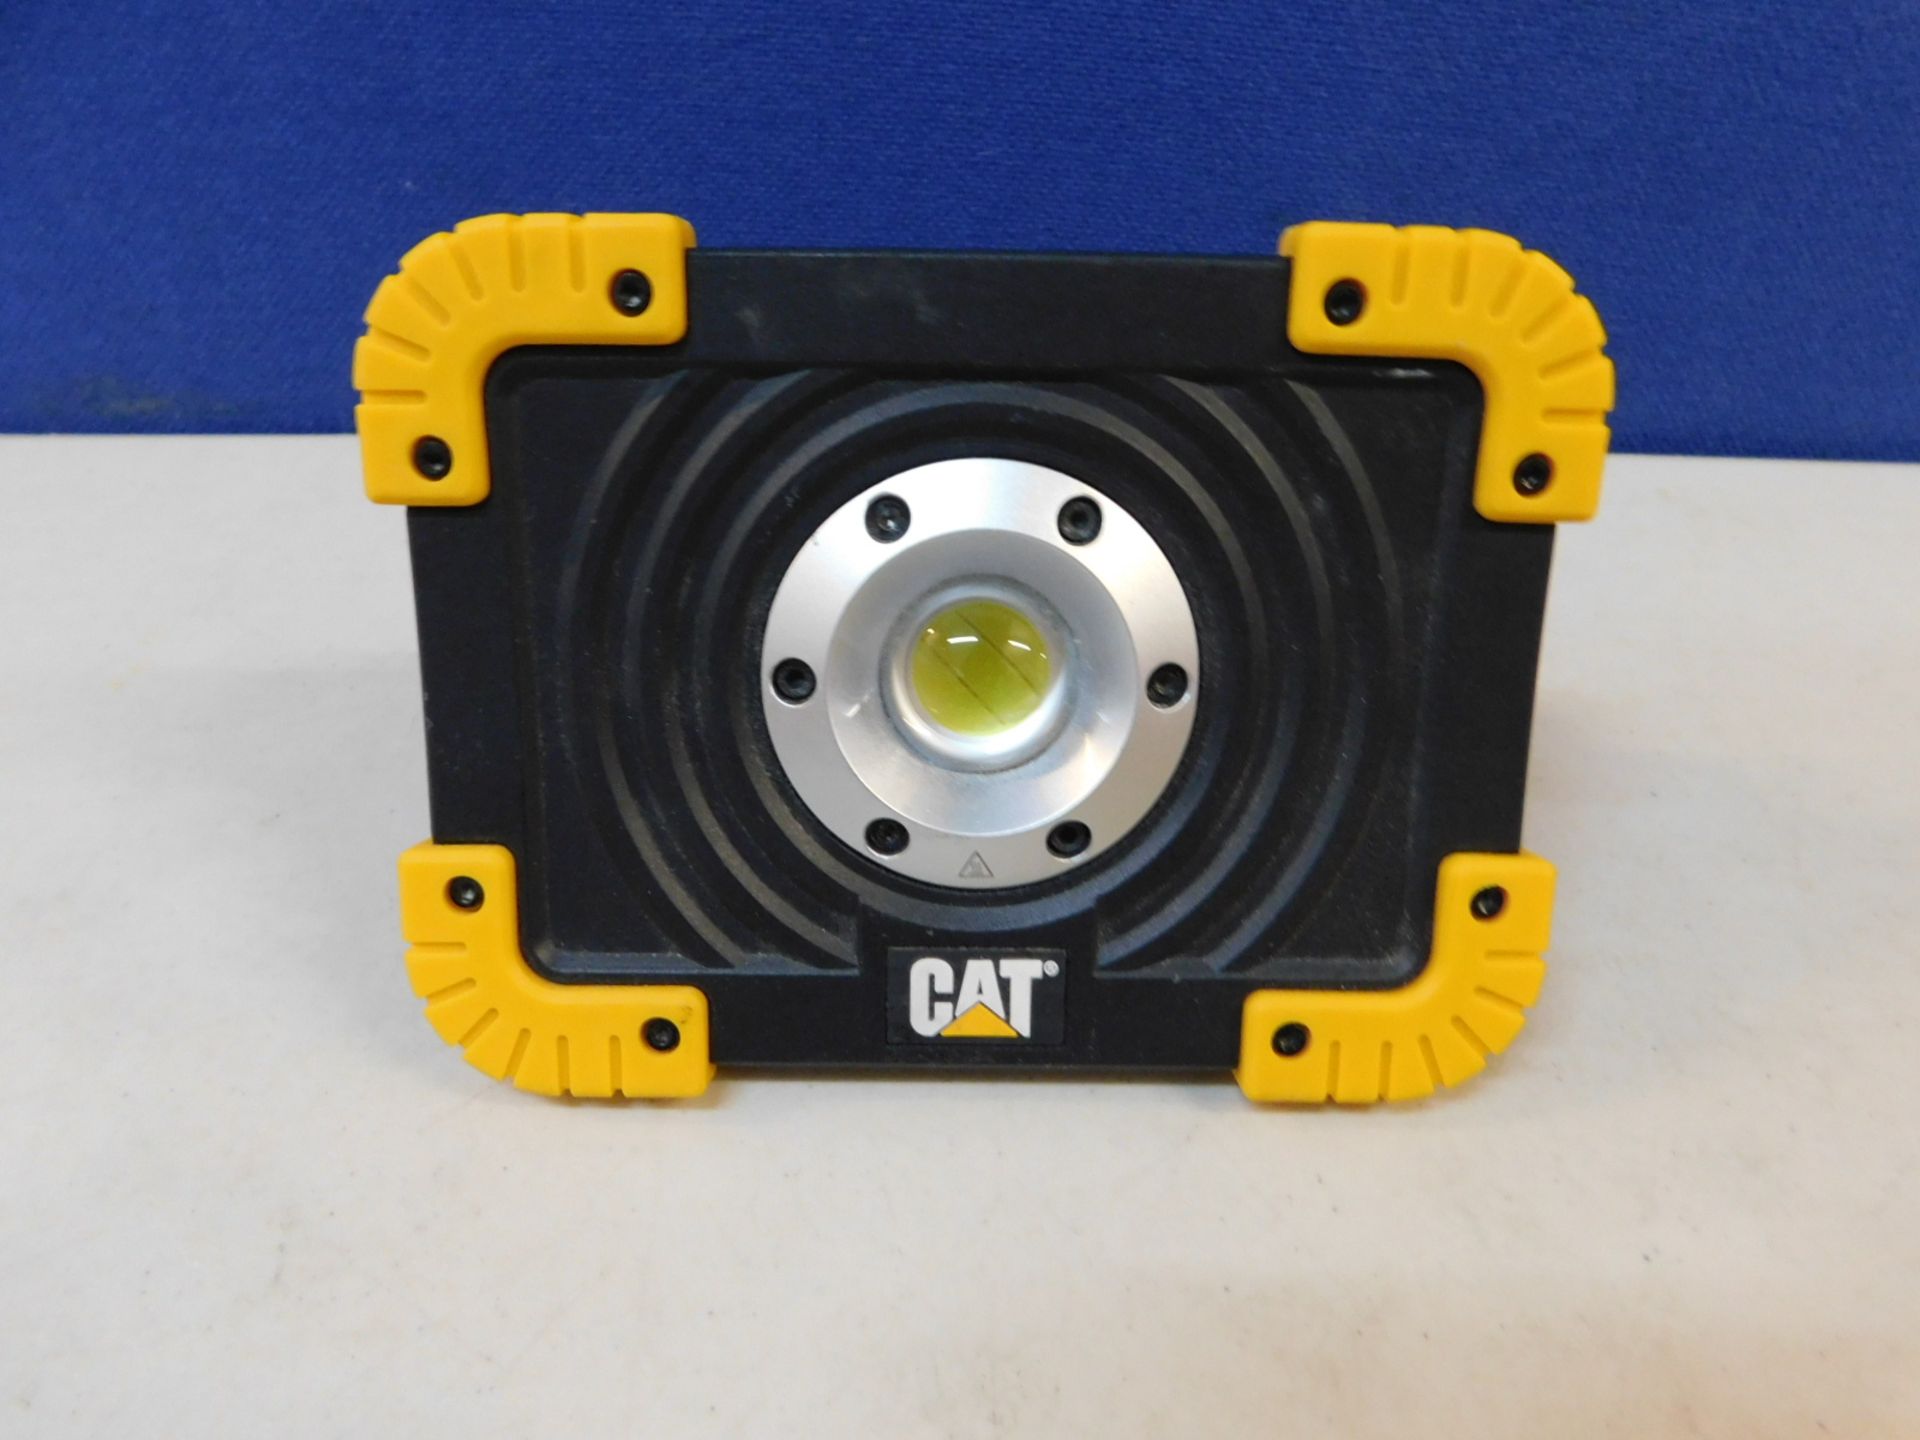 1 CAT RECHARGEABLE LED WORK LIGHT RRP £39.99